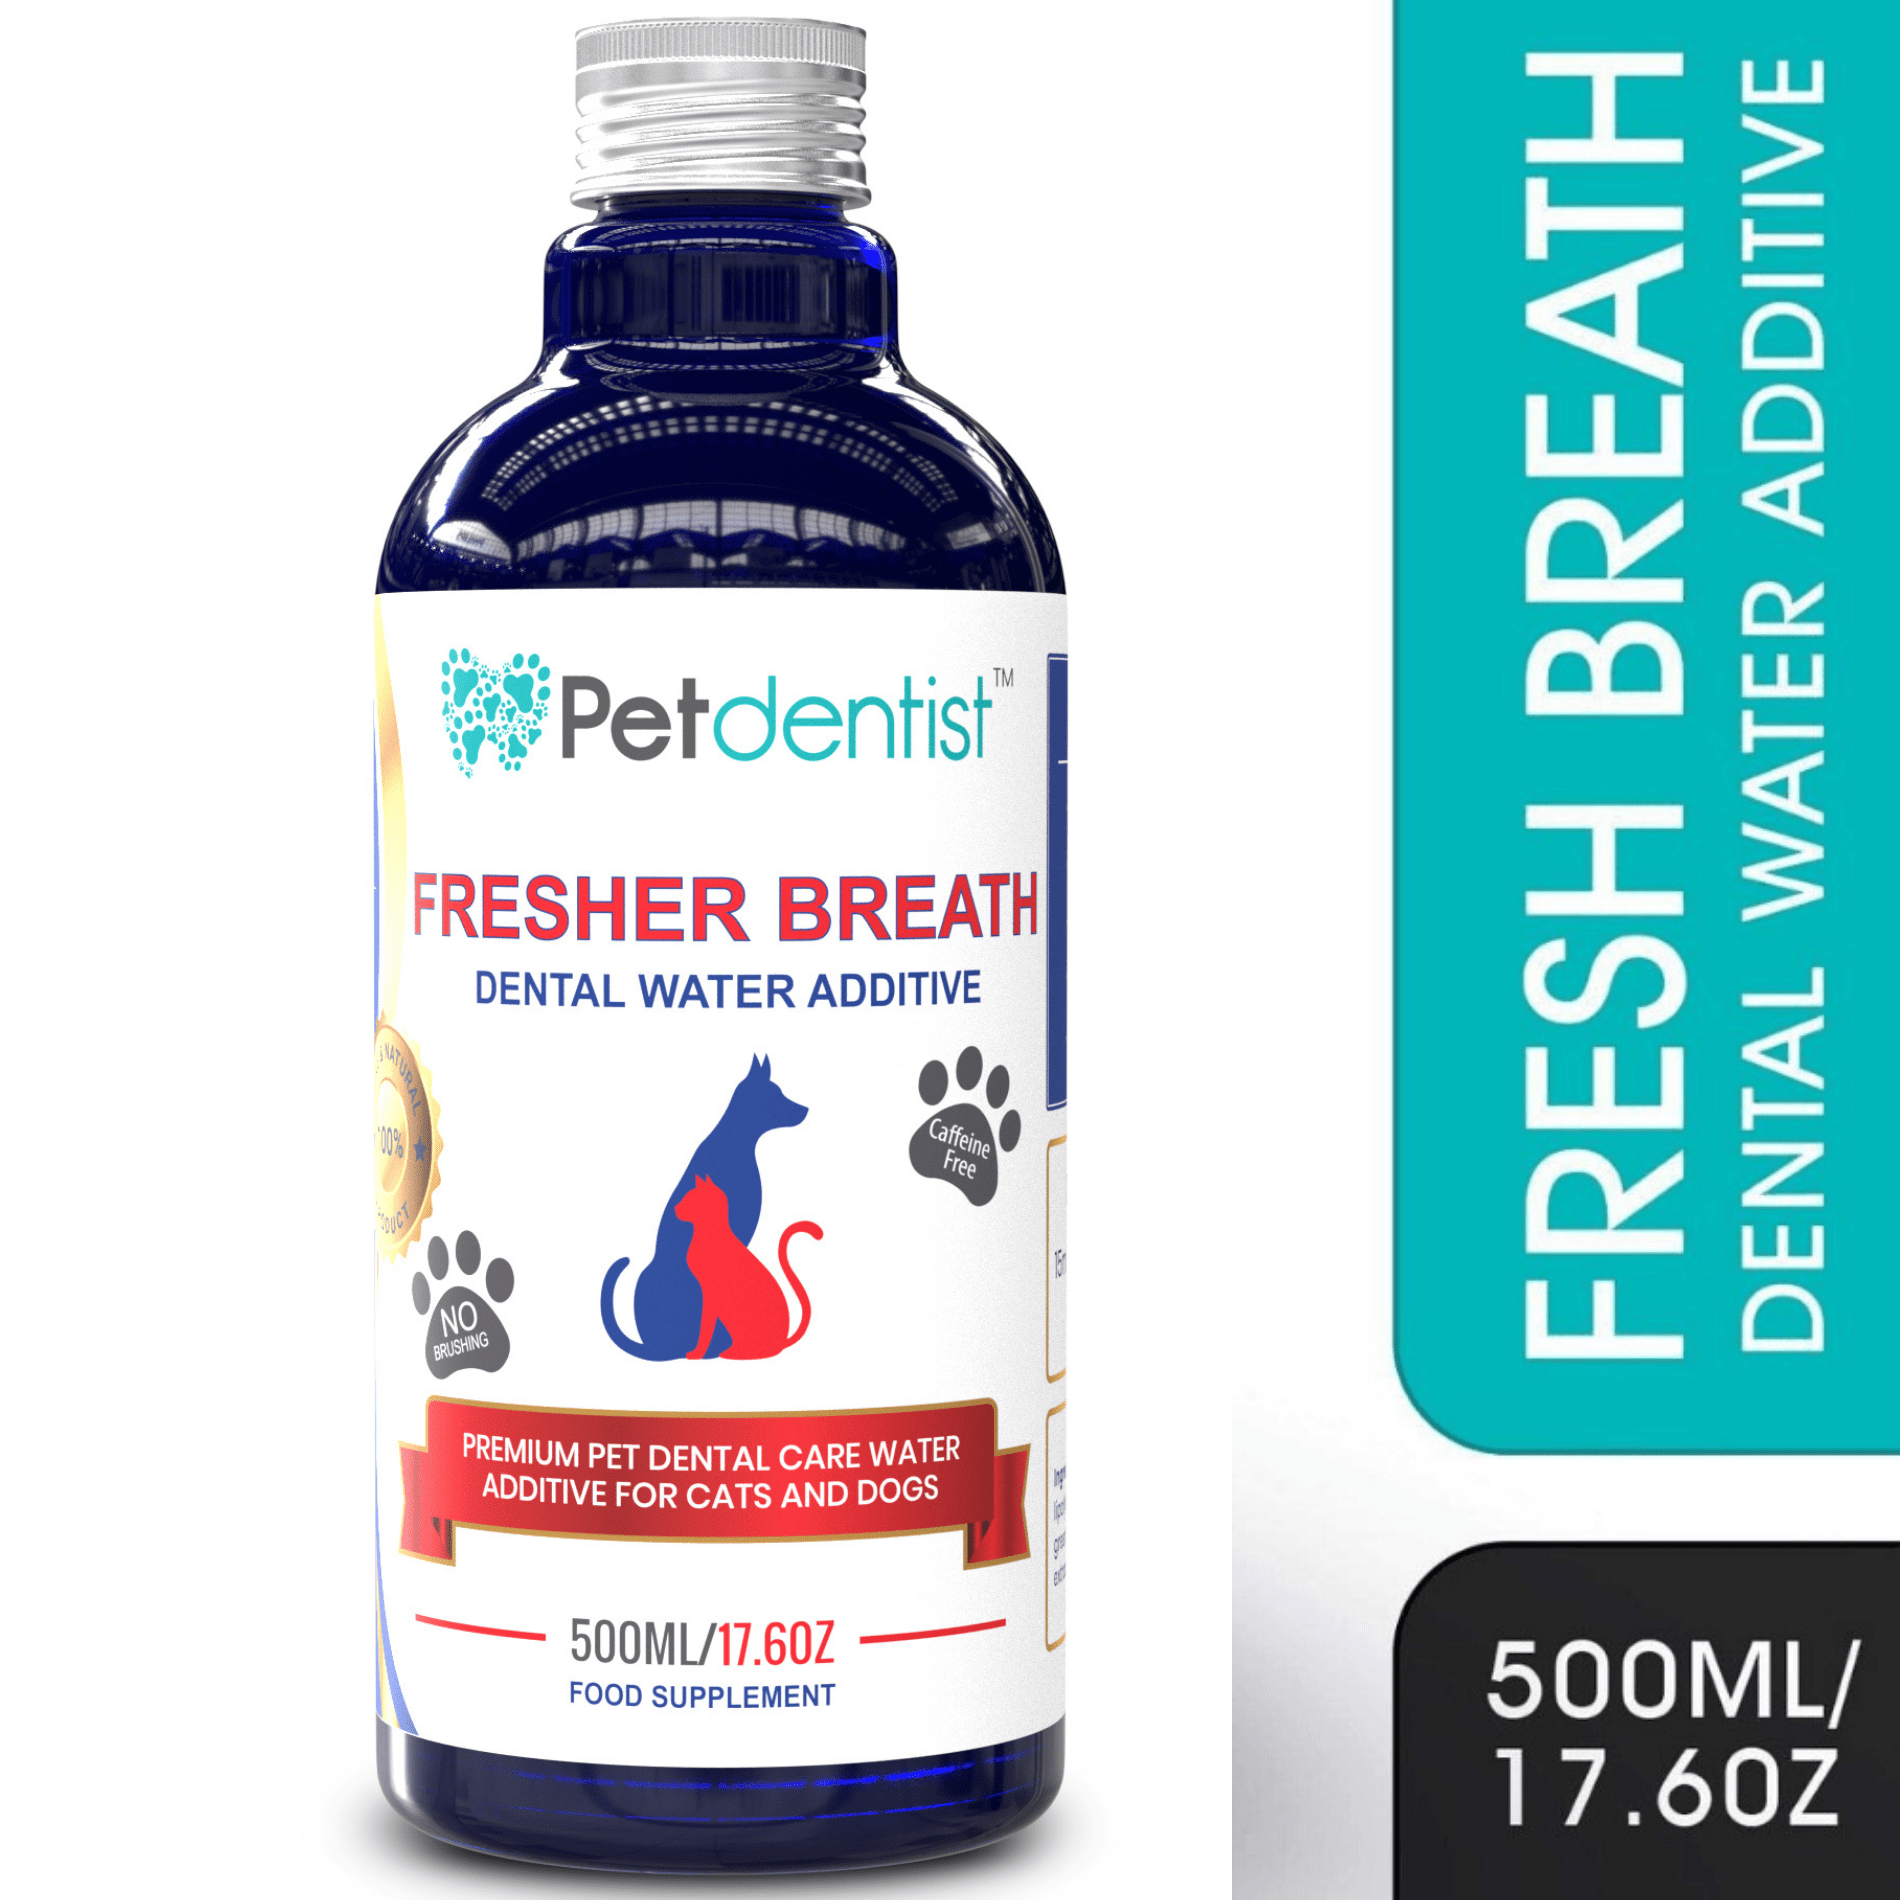 Petdentist Pet Supplement Water Aadditive Petdentist Mouthwash For Cats & Dogs -500ml